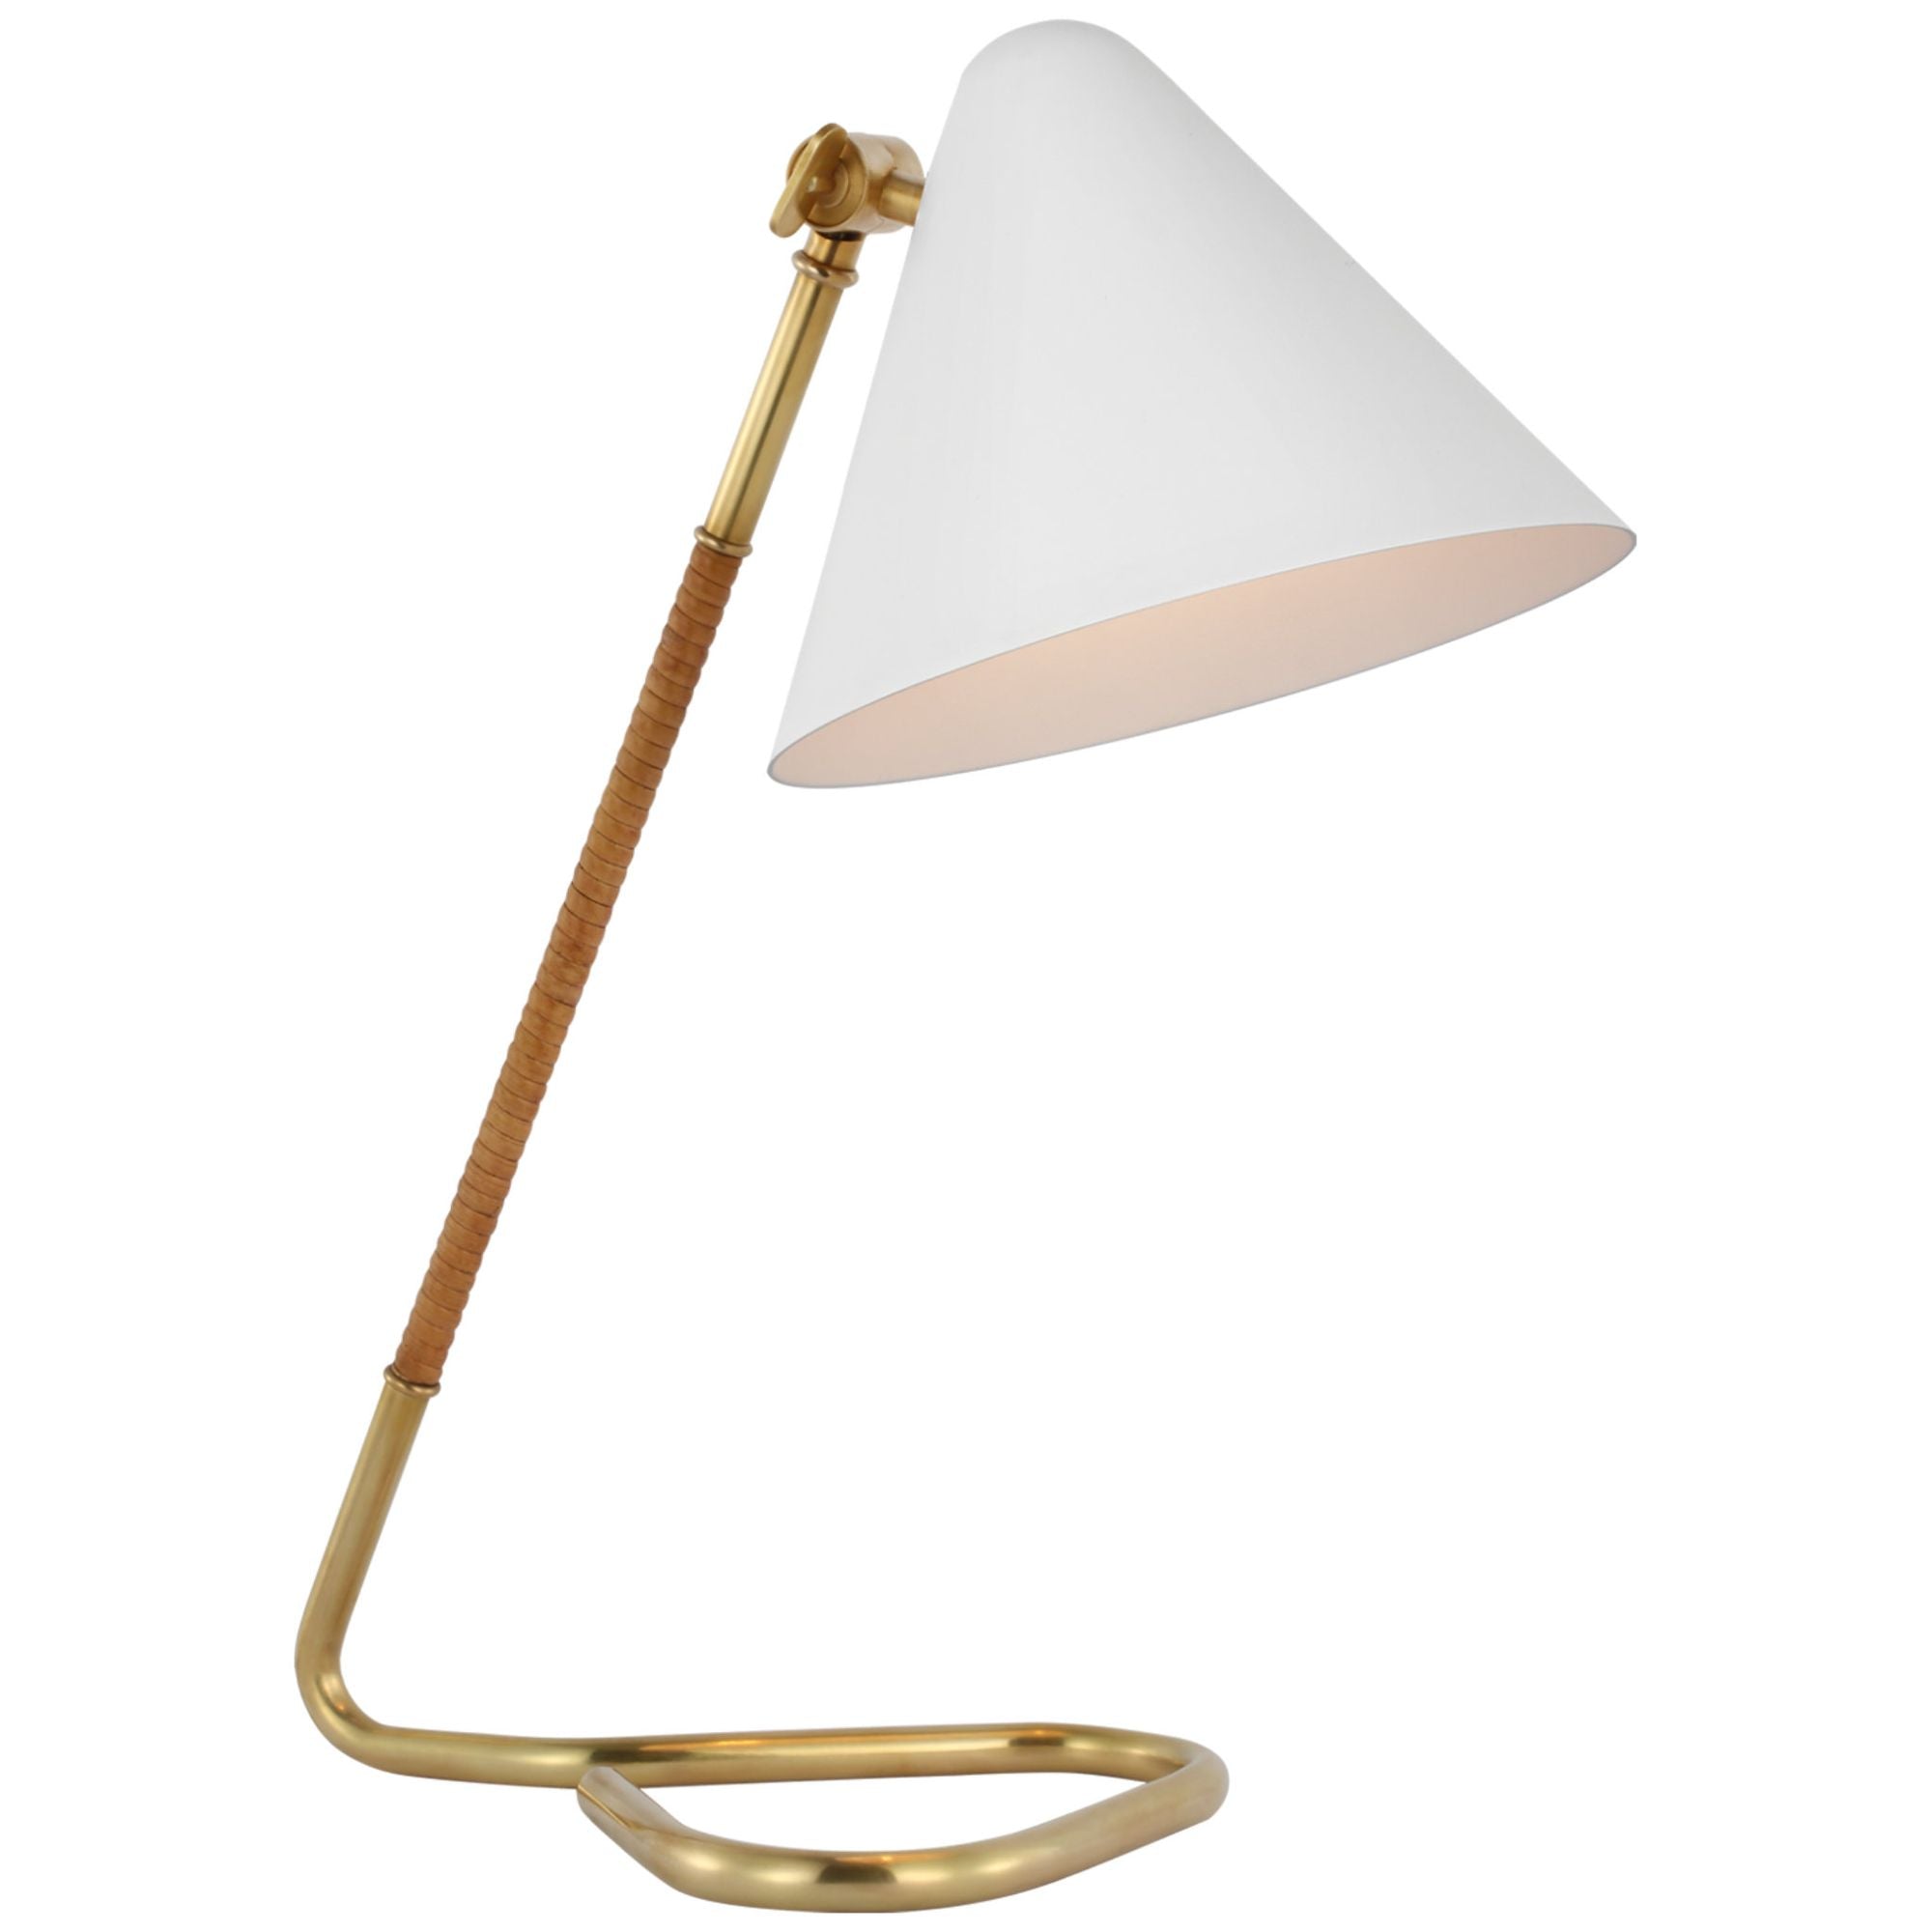 Amber Lewis Laken Small Desk Lamp in Hand-Rubbed Antique Brass and Nat